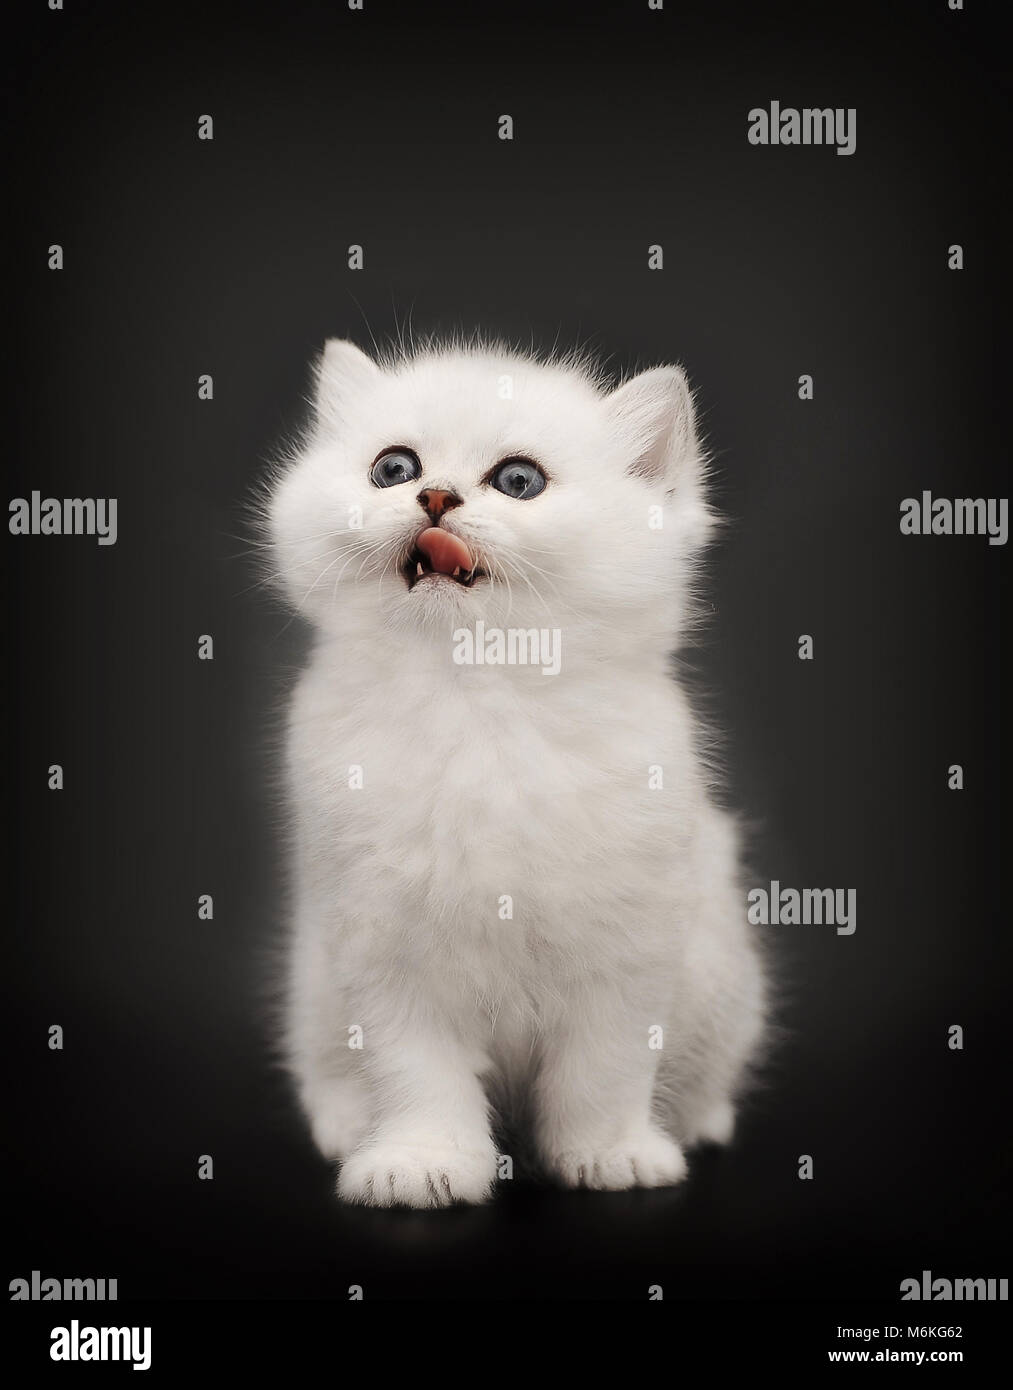 White British kitten licking his tongue out on black background . Stock Photo